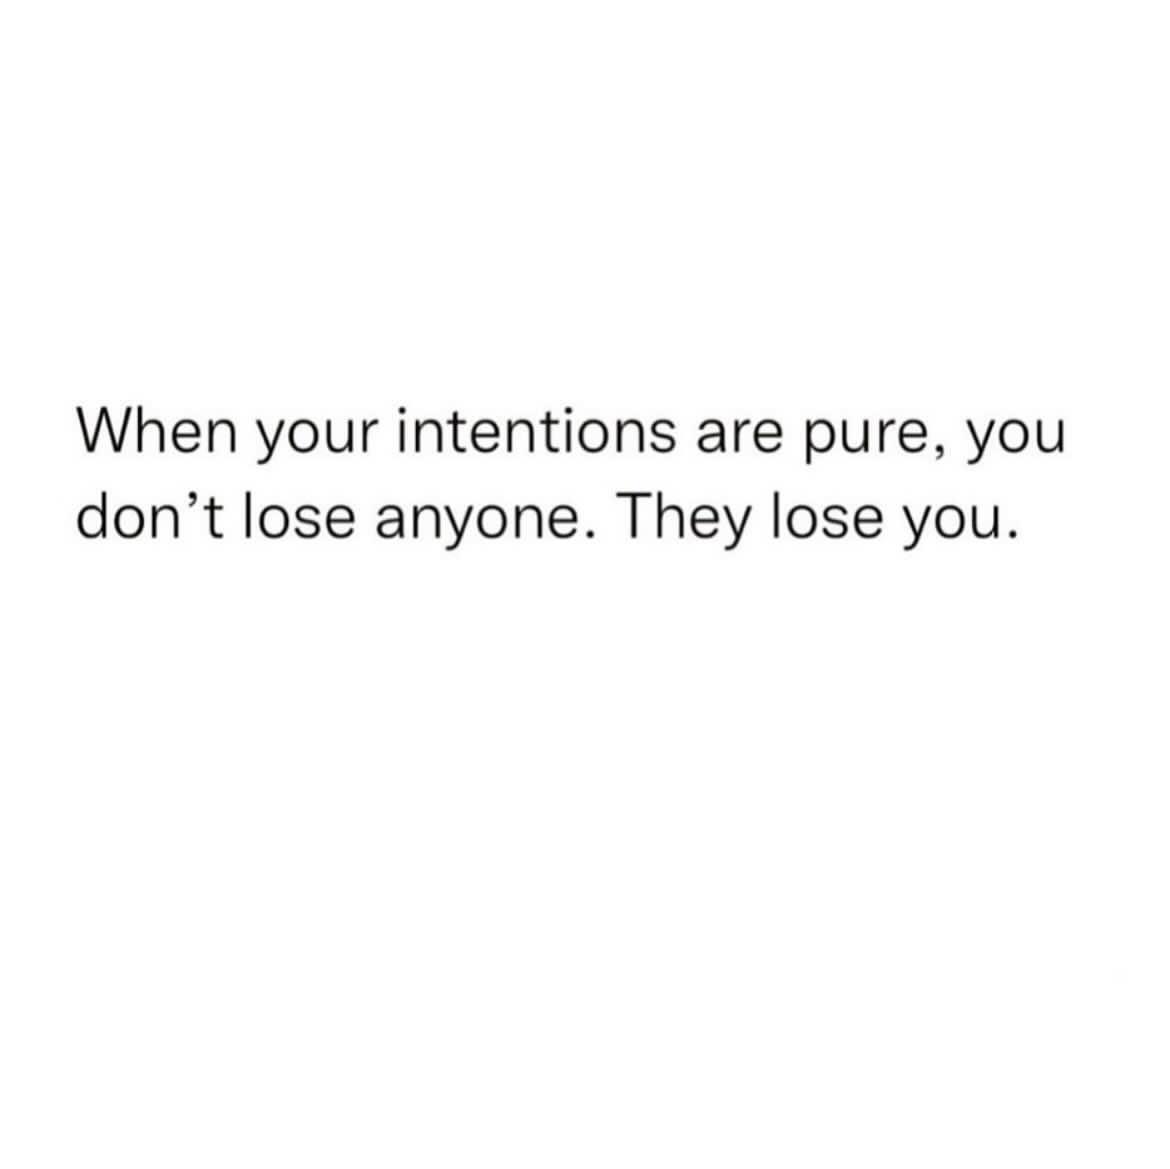 They lose you.